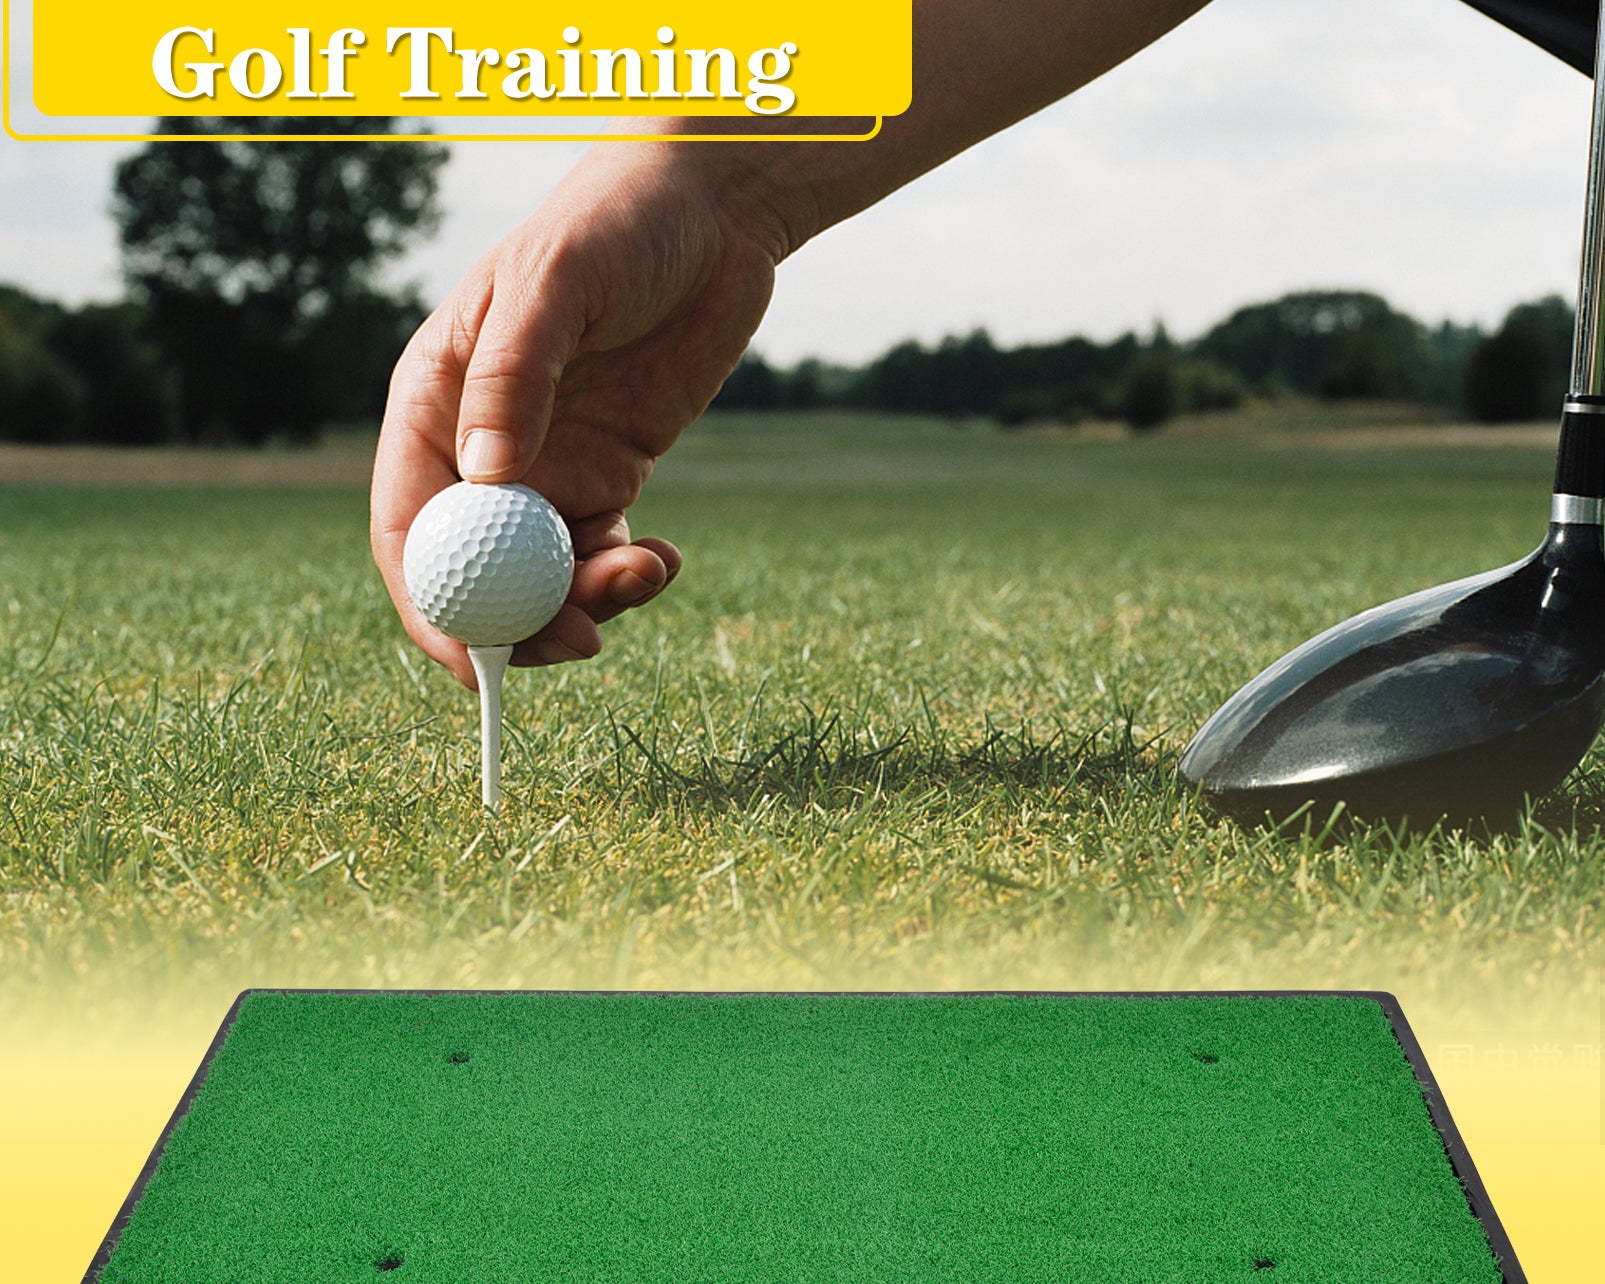 The construction of a golf course involves considering several factors！